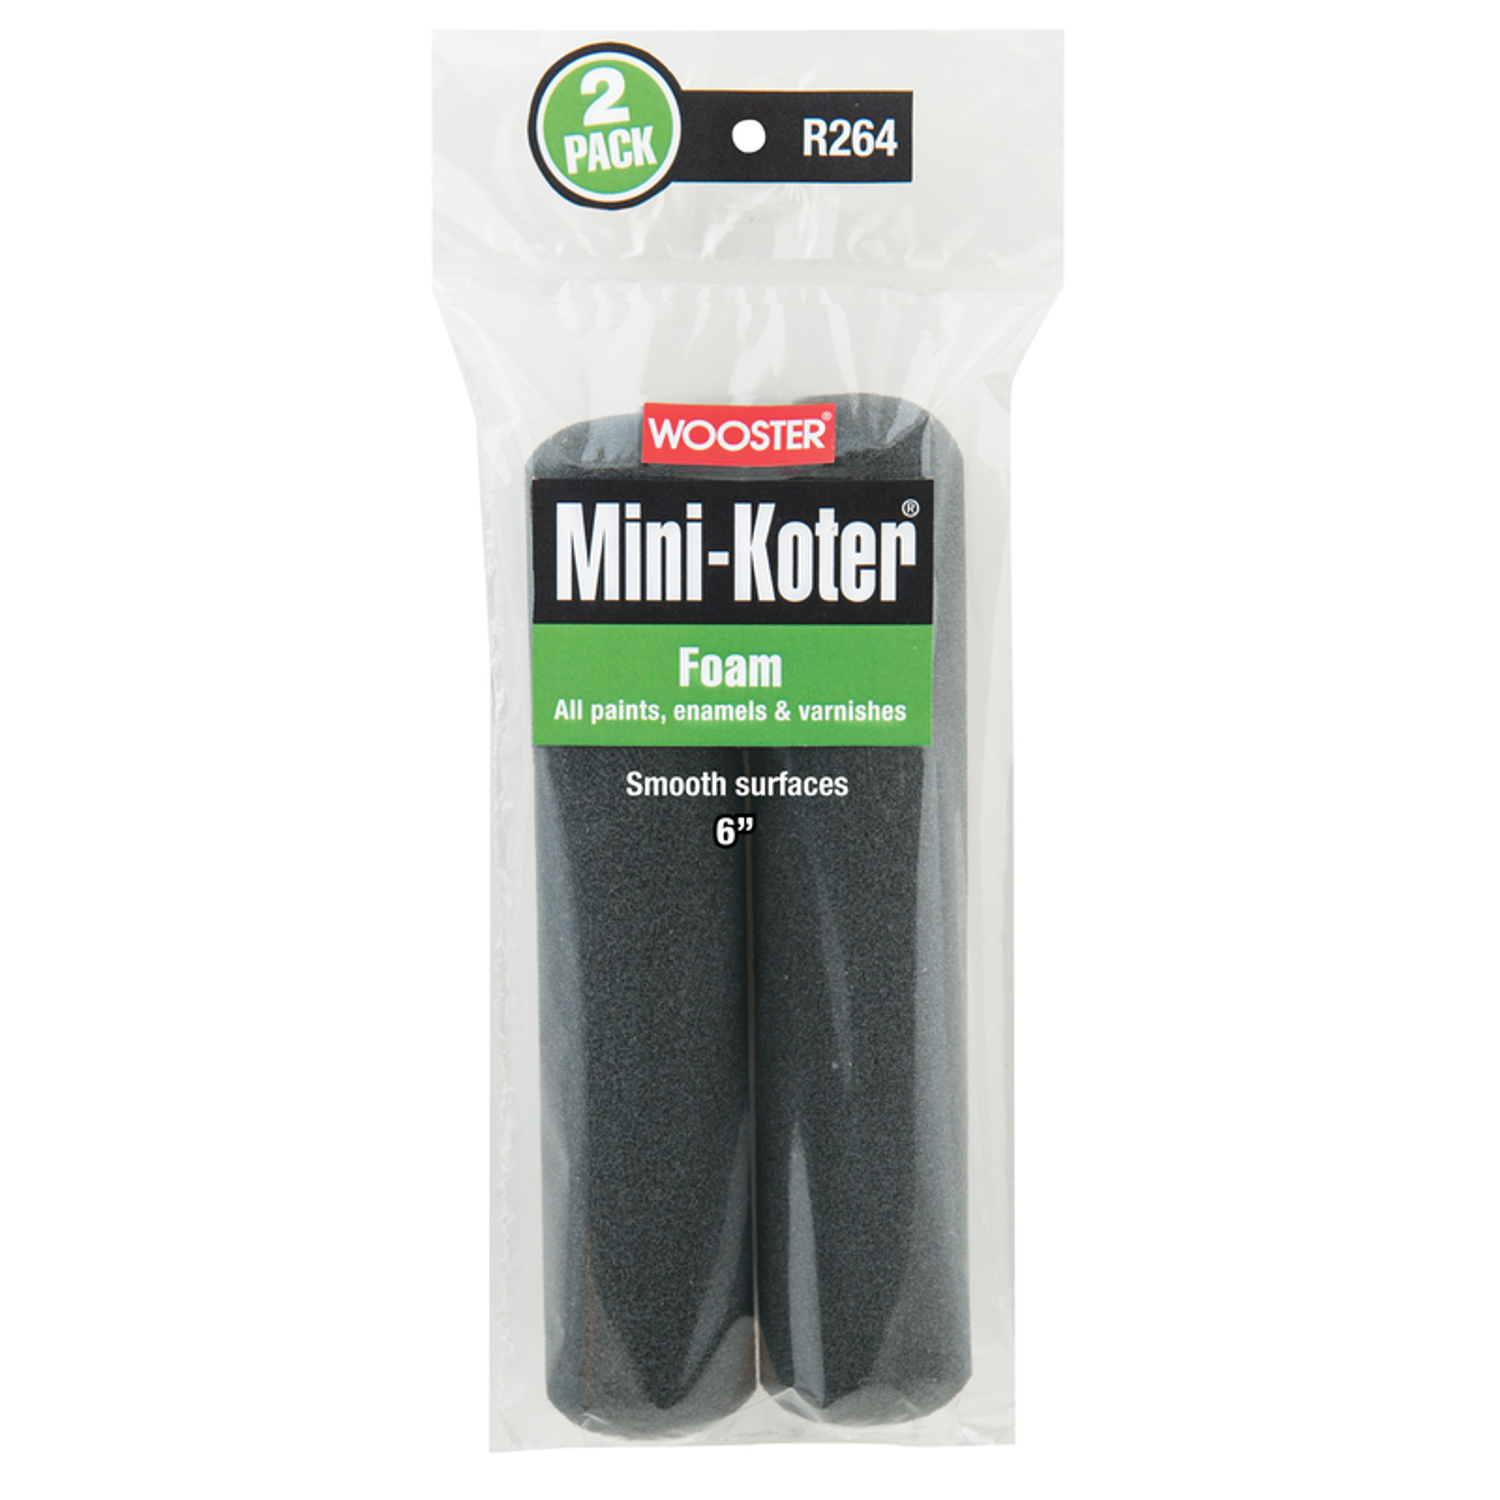 Photos - Putty Knife / Painting Tool Wooster Mini-Koter Foam 6 in. W Mini Paint Roller Cover 2 pk R264-6